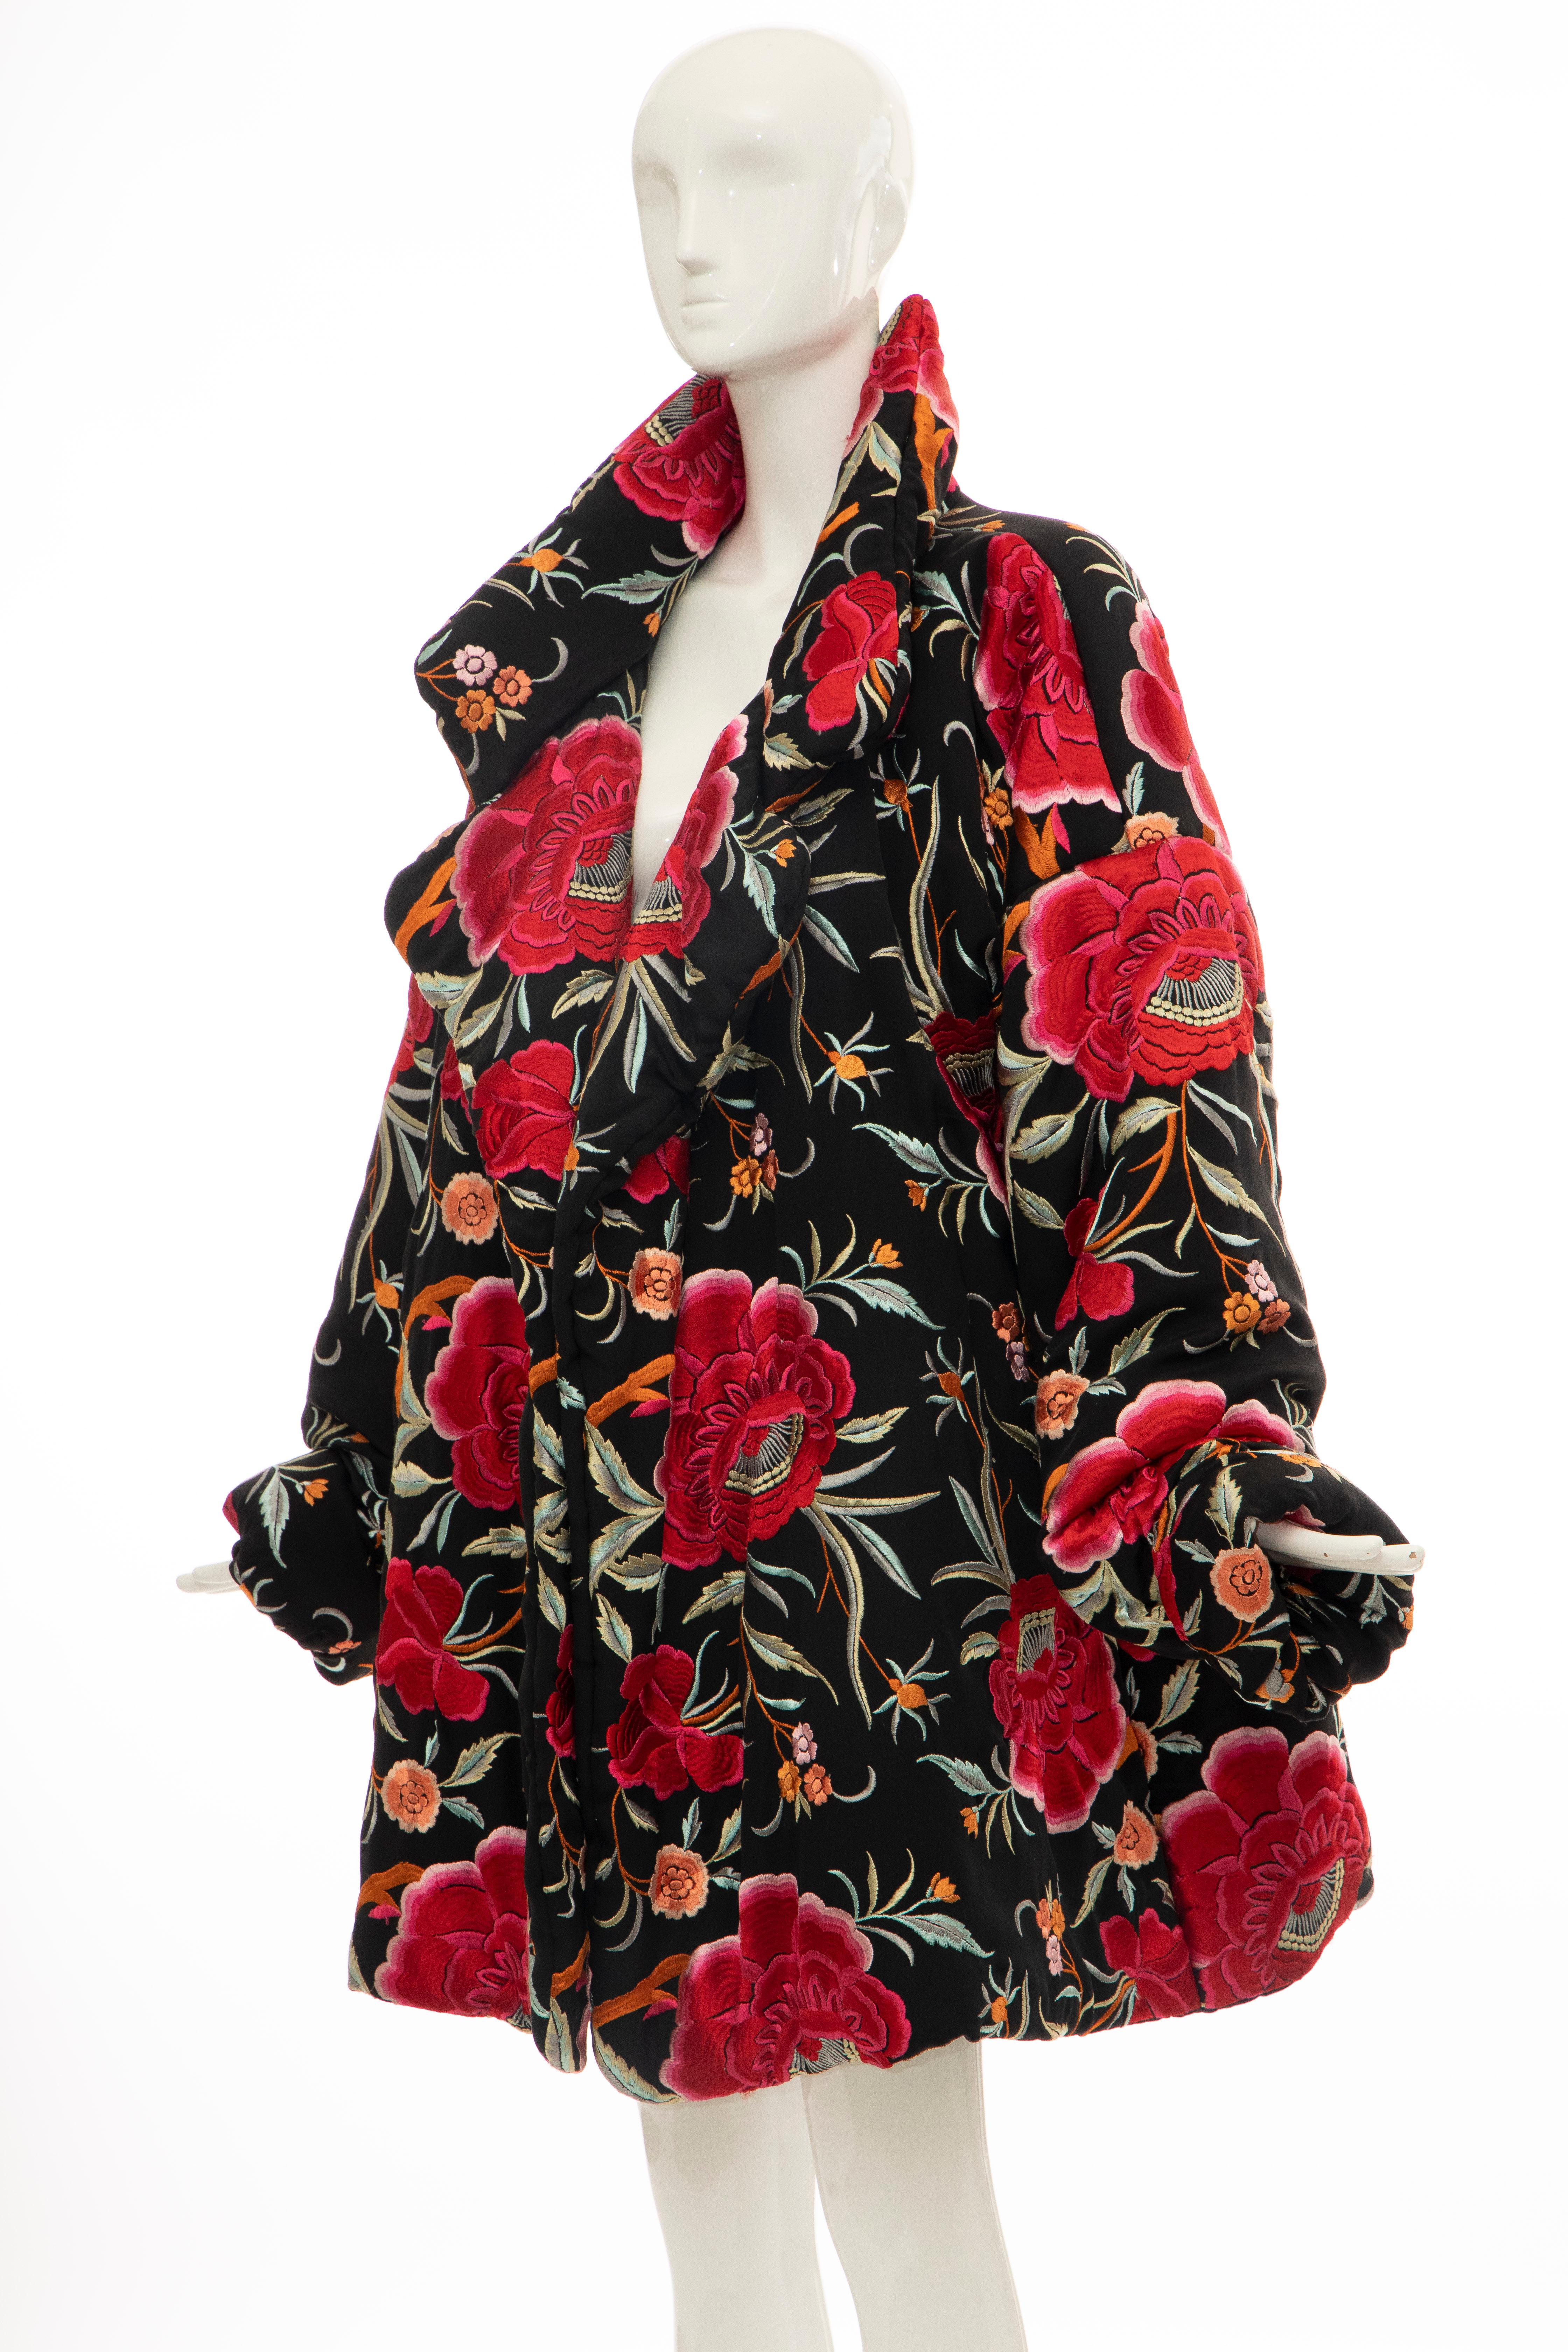 Norma Kamali Black Floral Embroidered Cocoon Coat, Circa: 1980's 9